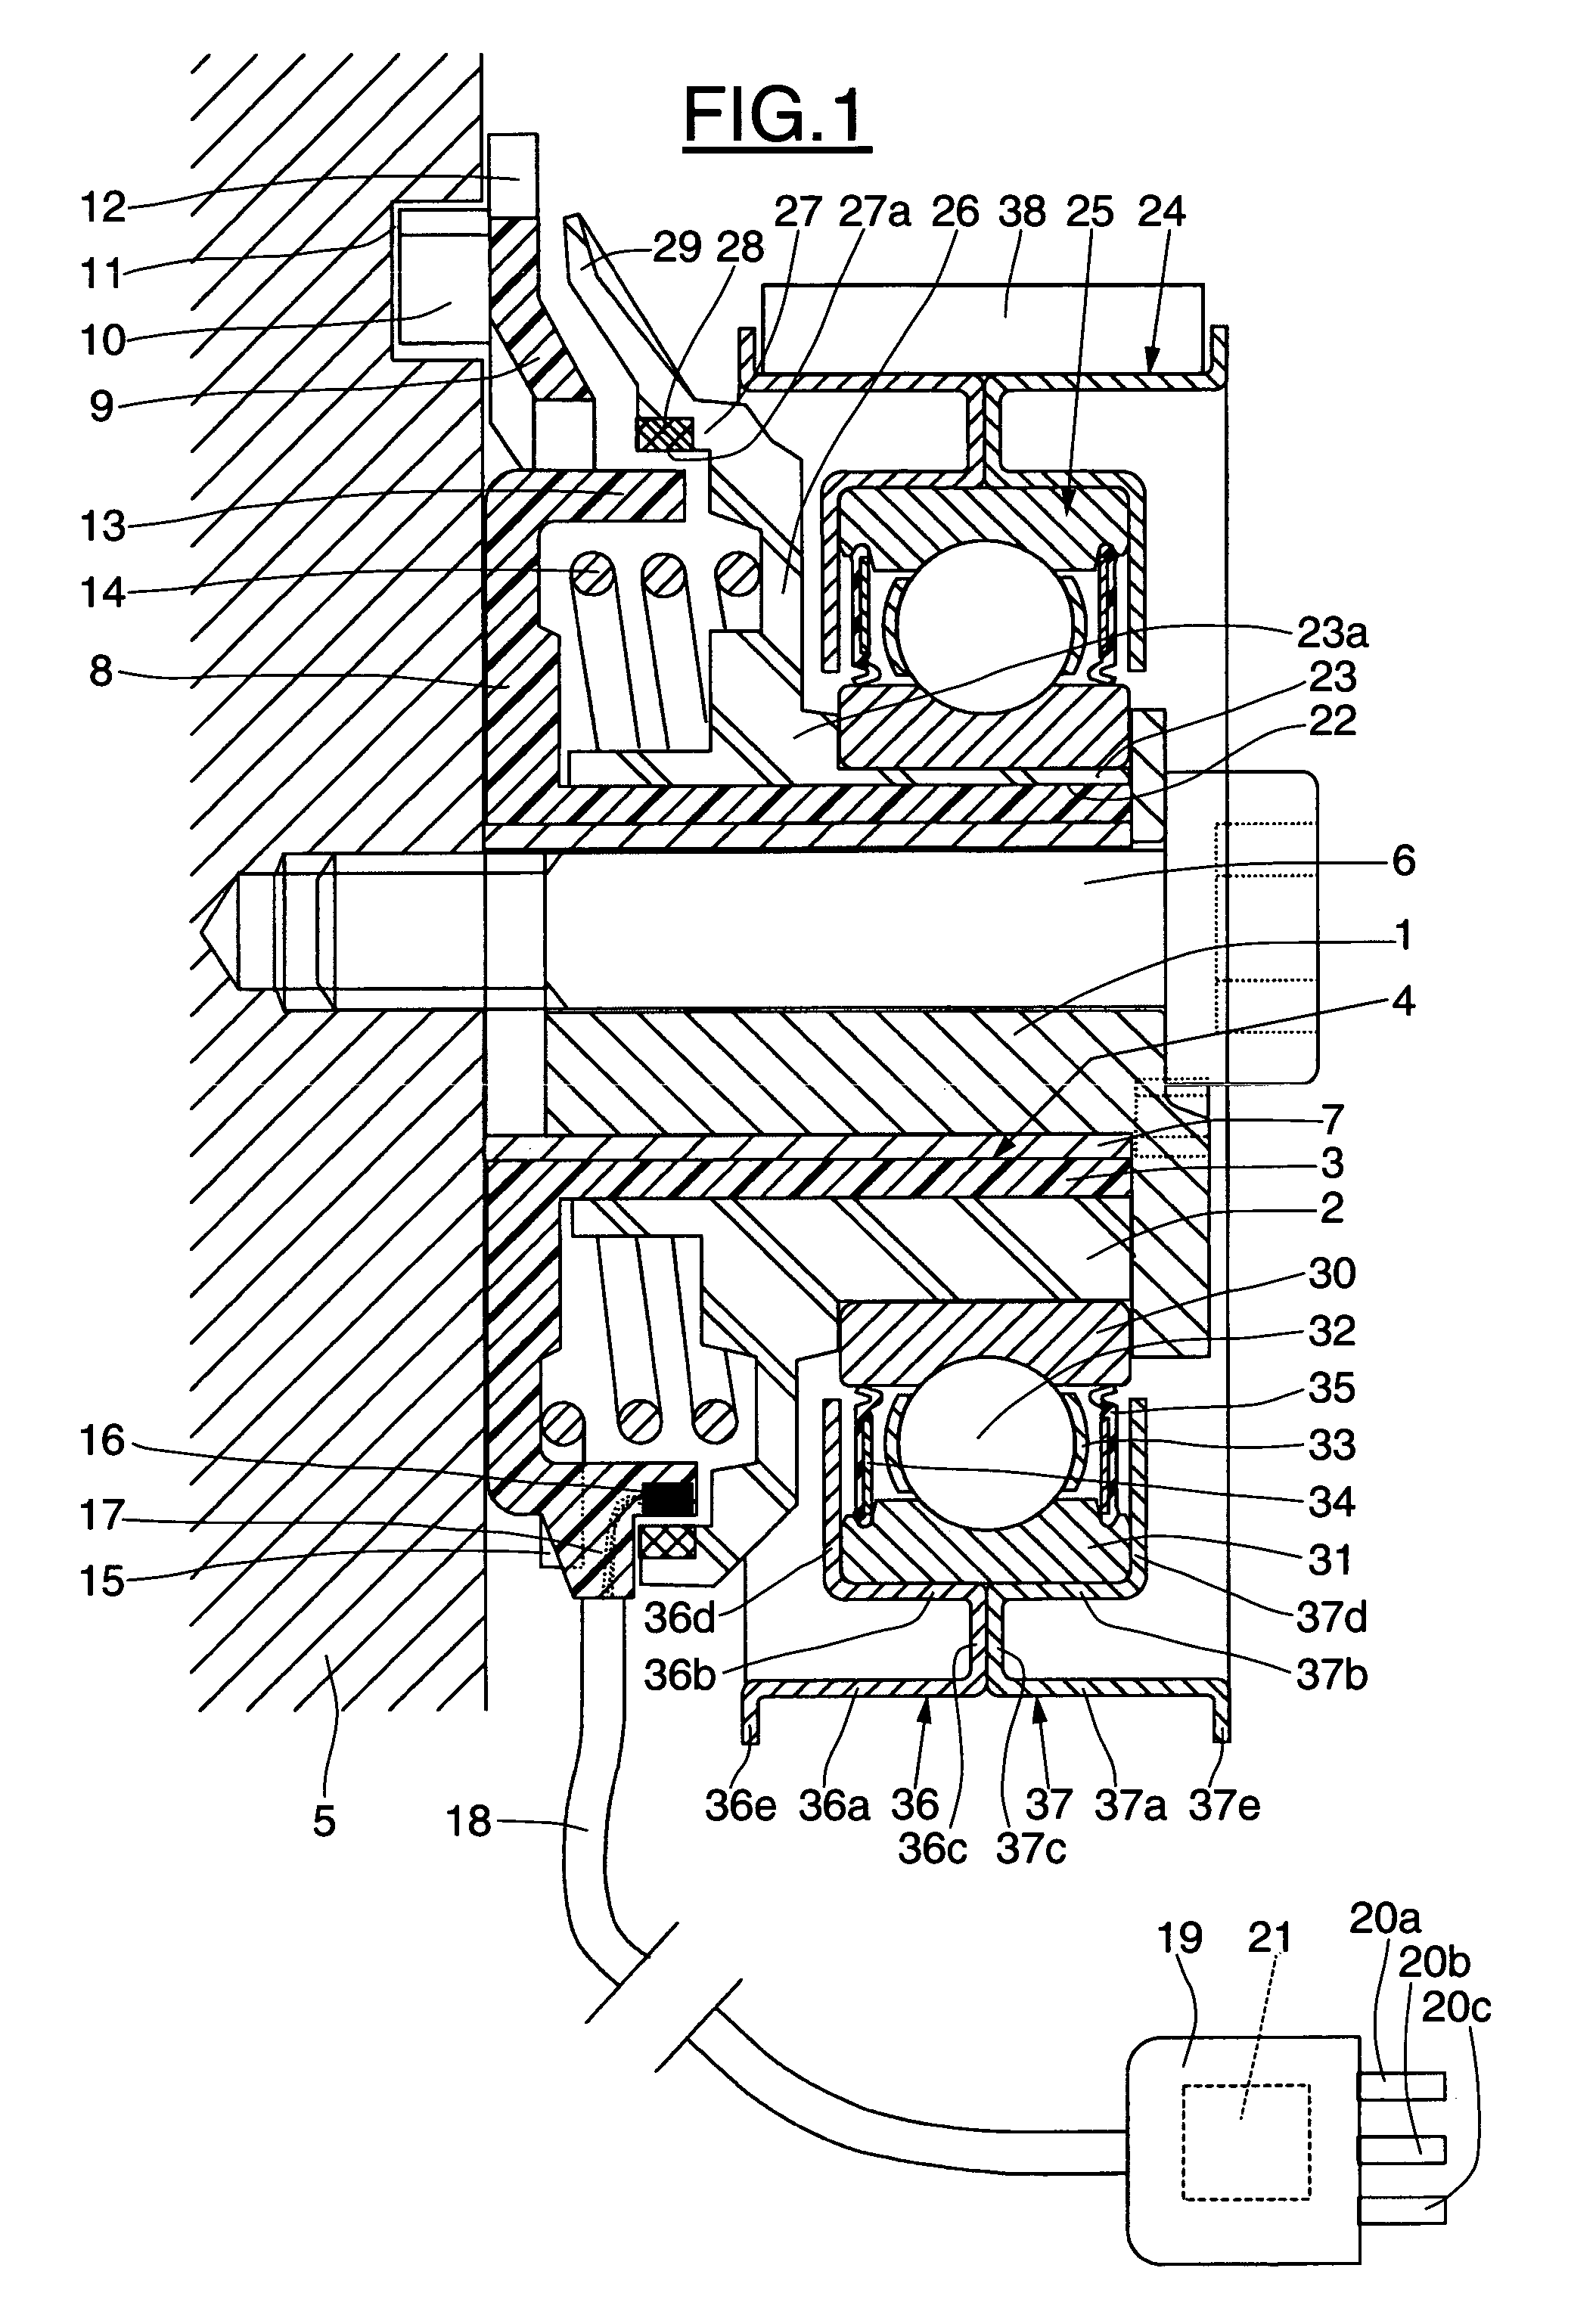 Instrumented take-up unit and related control method